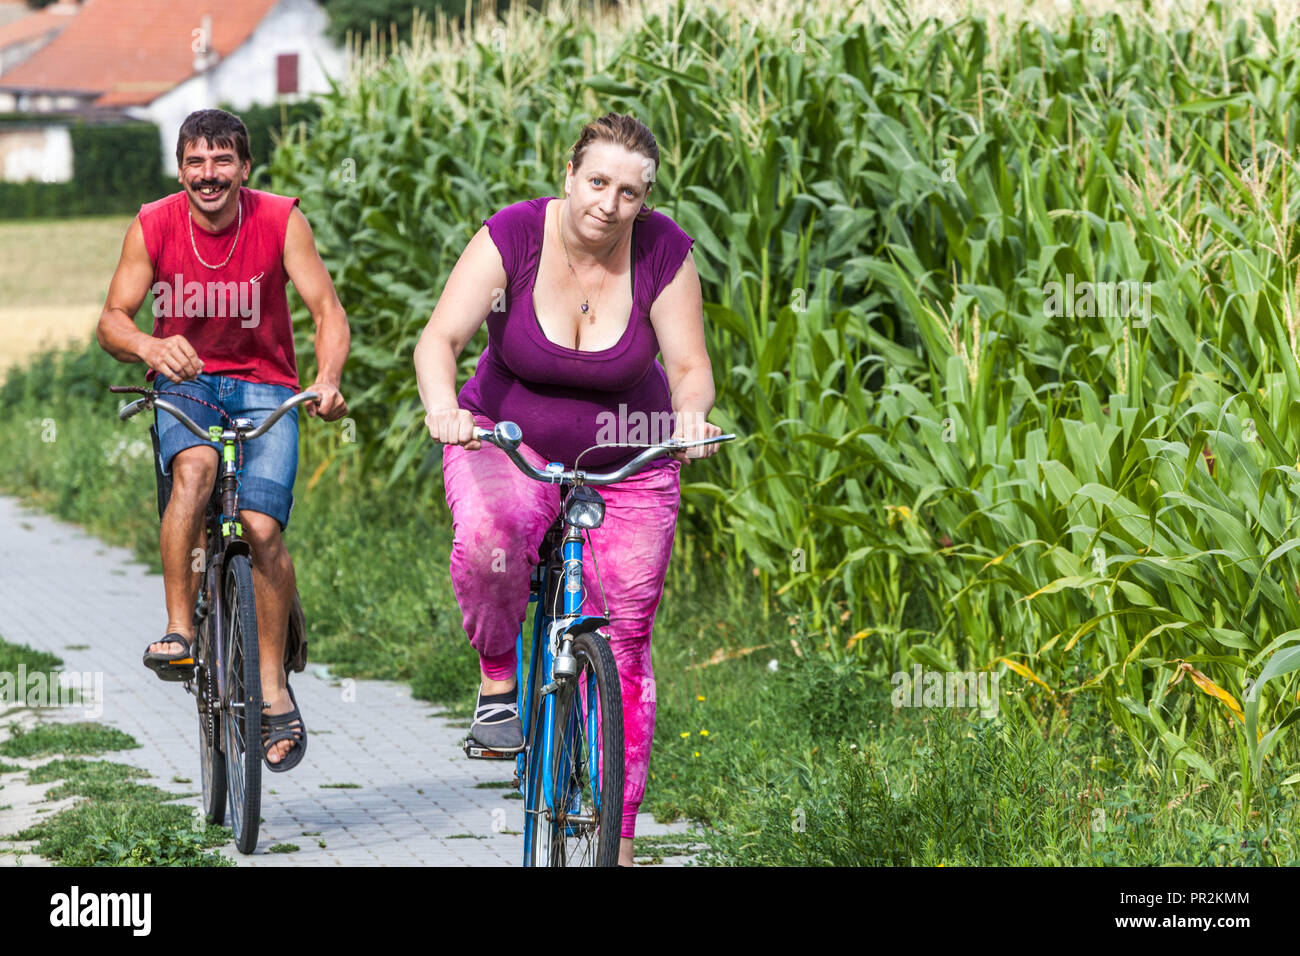 Czech people life, Smiling man and obese woman riding a bicycle, ride bike around the cornfield, Moravian countryside Czech Republic biking overweight Stock Photo